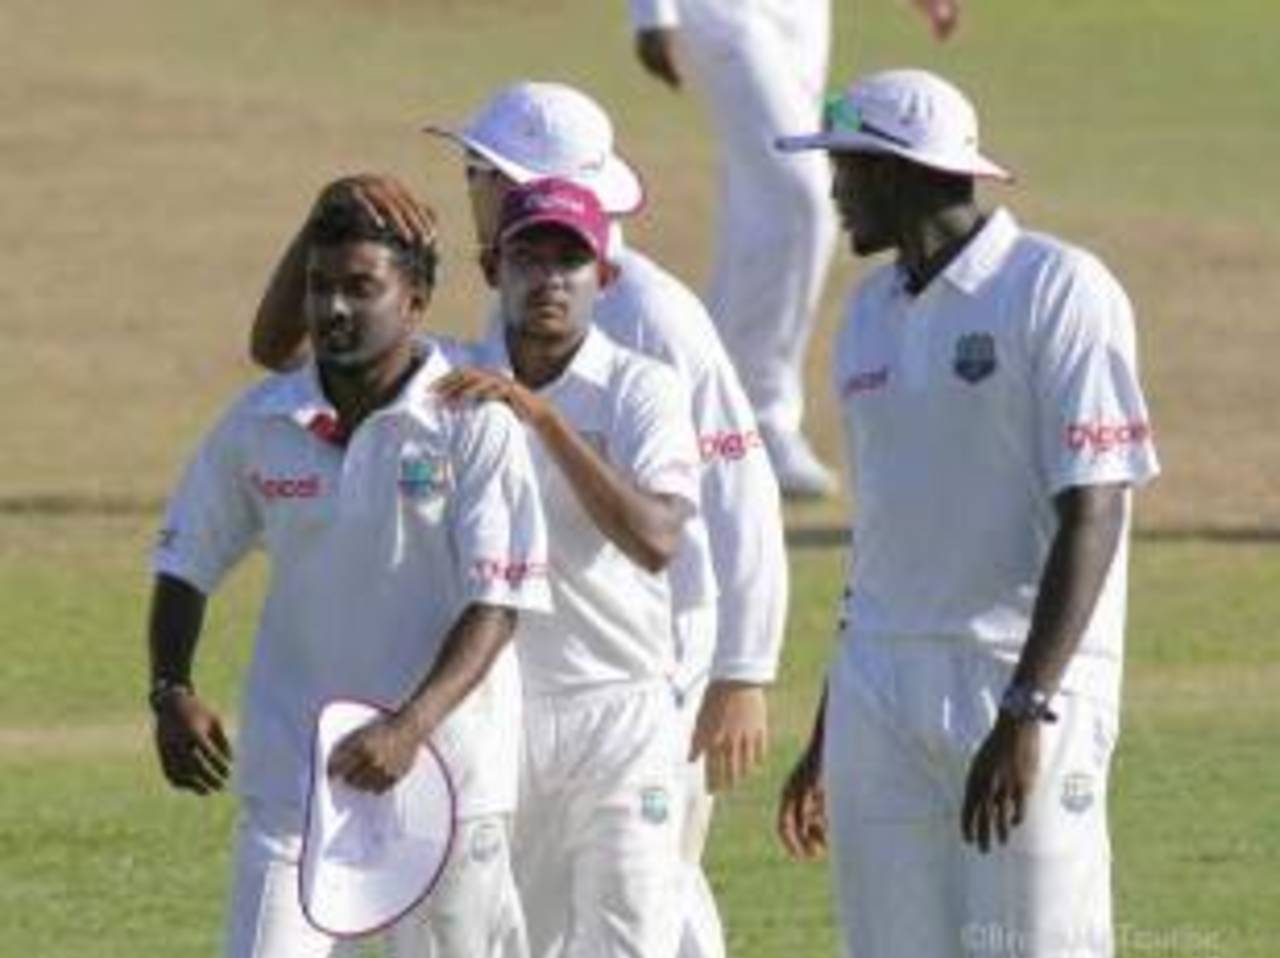 While Veerasammy Permaul (left) has made it to the West Indies Test squad, Devendra Bishoo is a few steps below the left-arm spinner in the pecking order&nbsp;&nbsp;&bull;&nbsp;&nbsp;West Indies Cricket